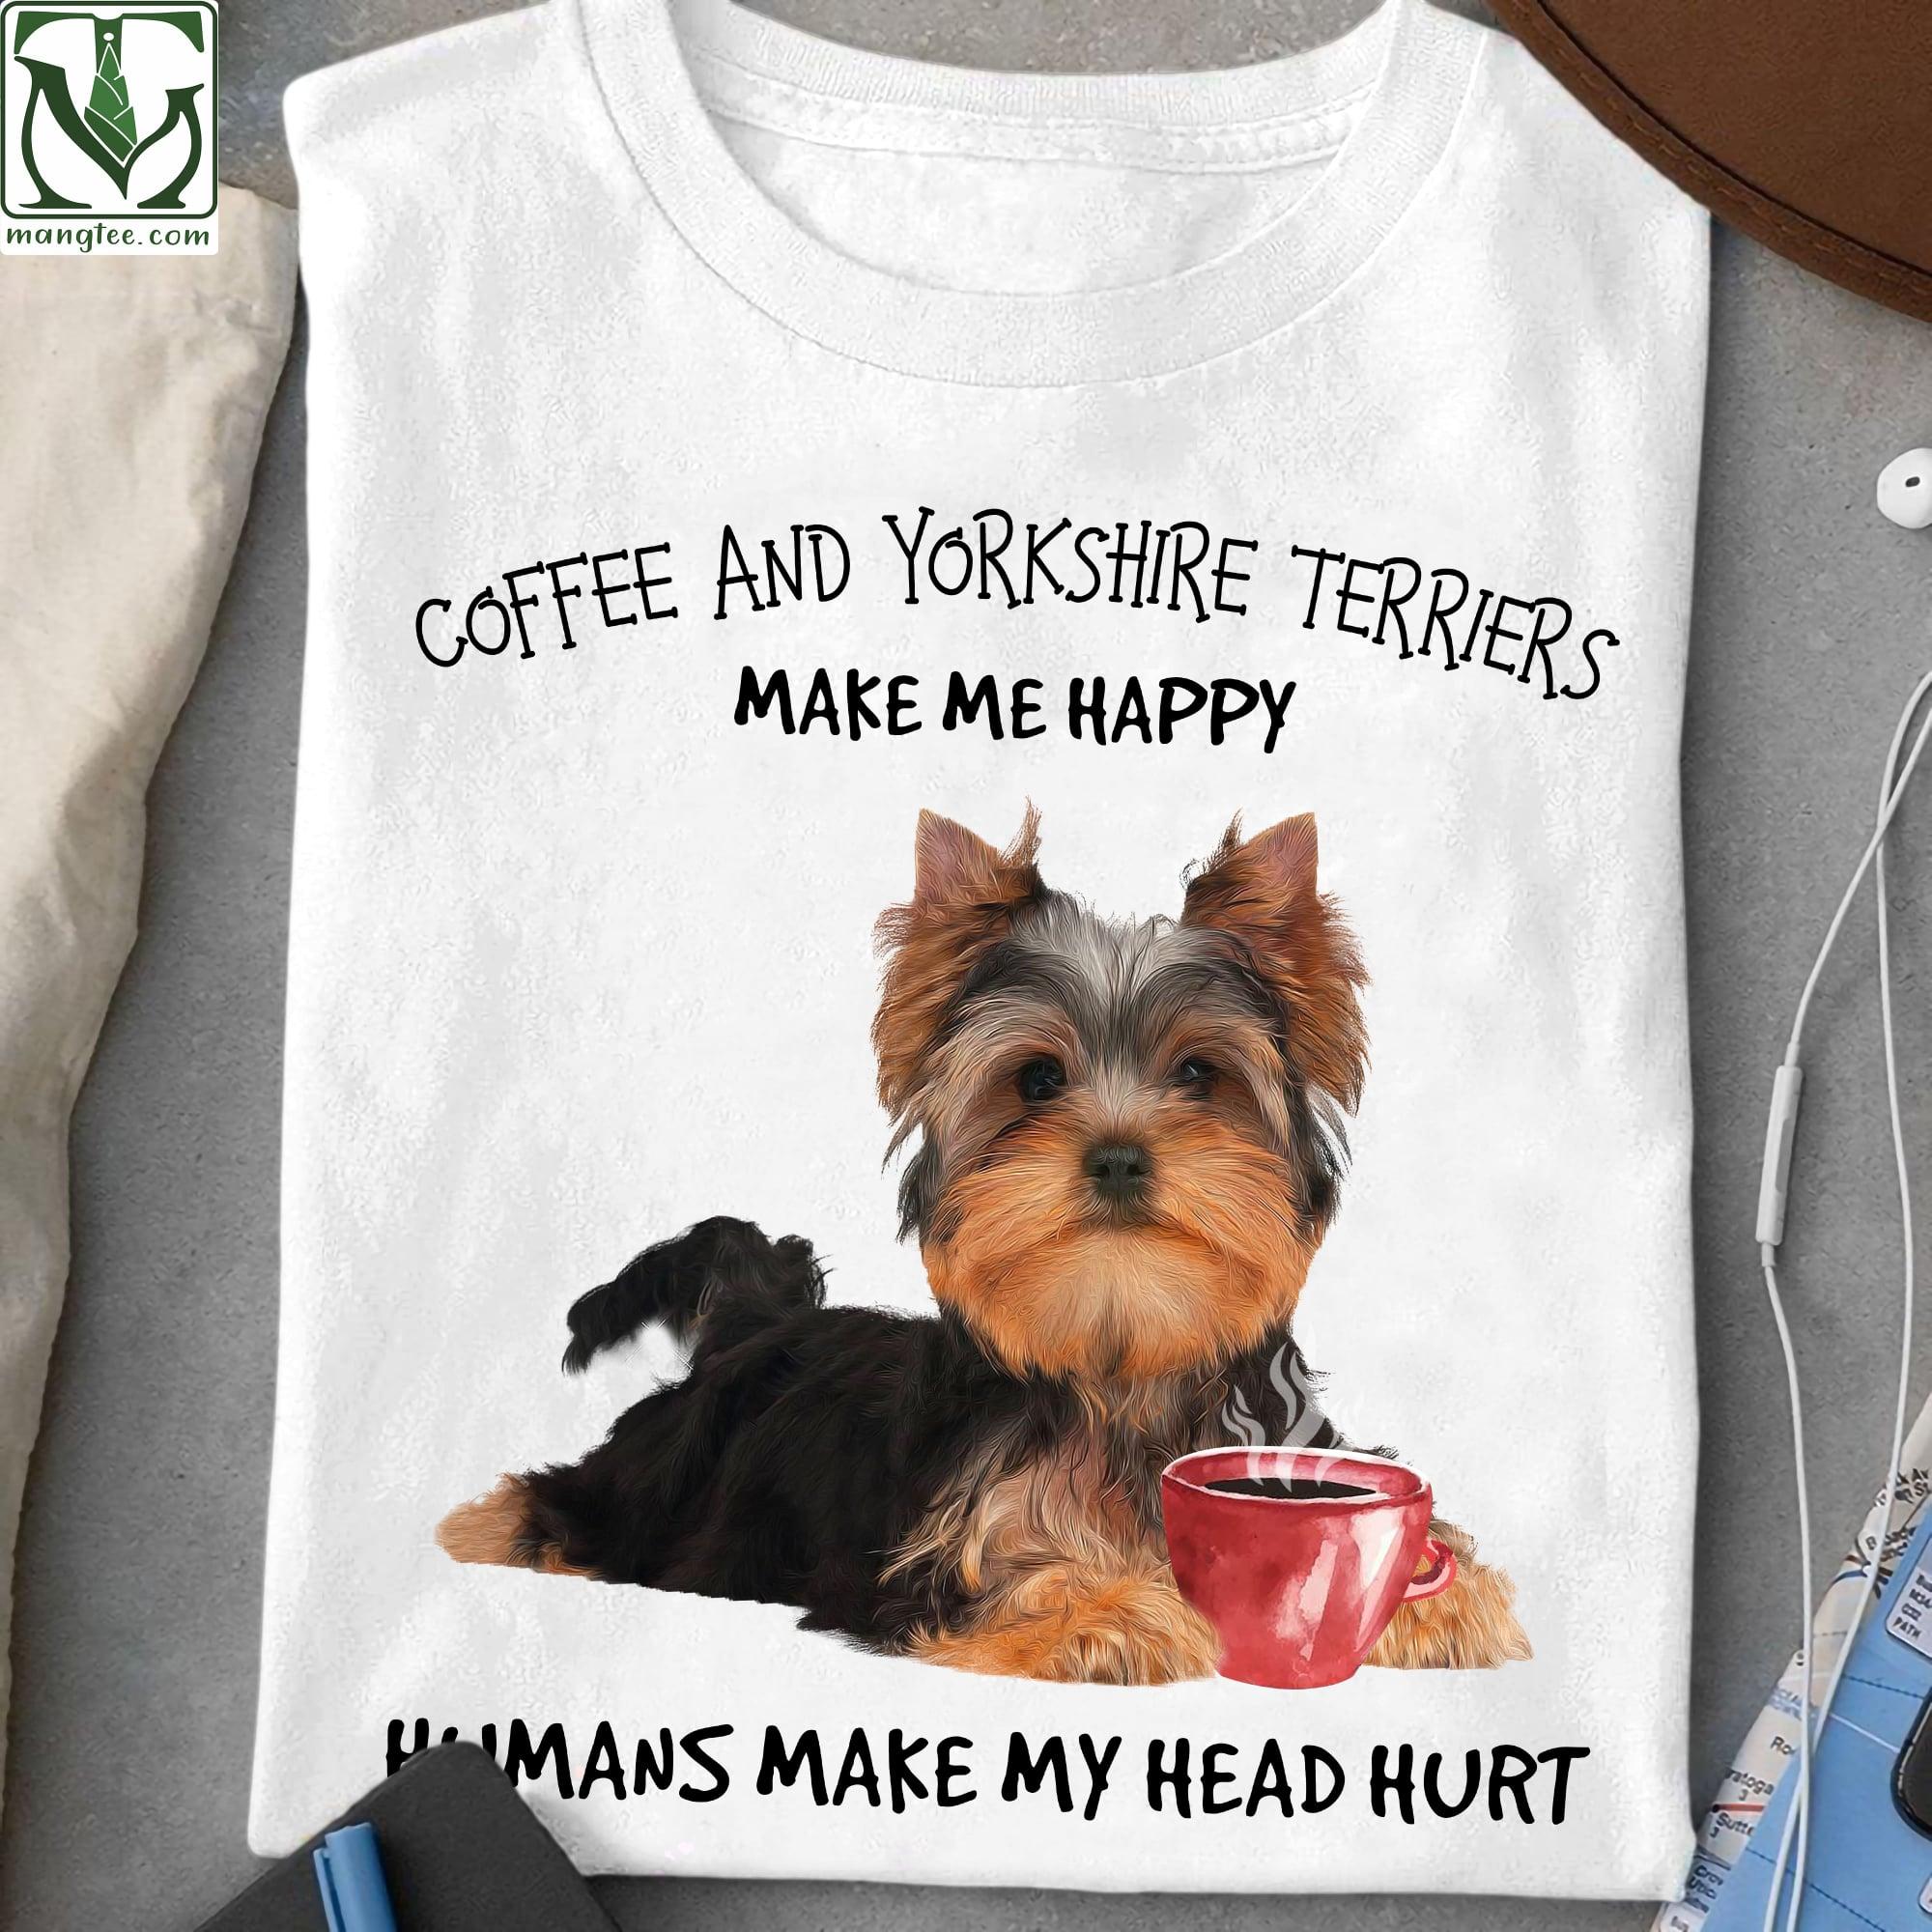 Coffee and Yorkshire terriers make me happy, humans make my head hurt - Yorkshire dog owner